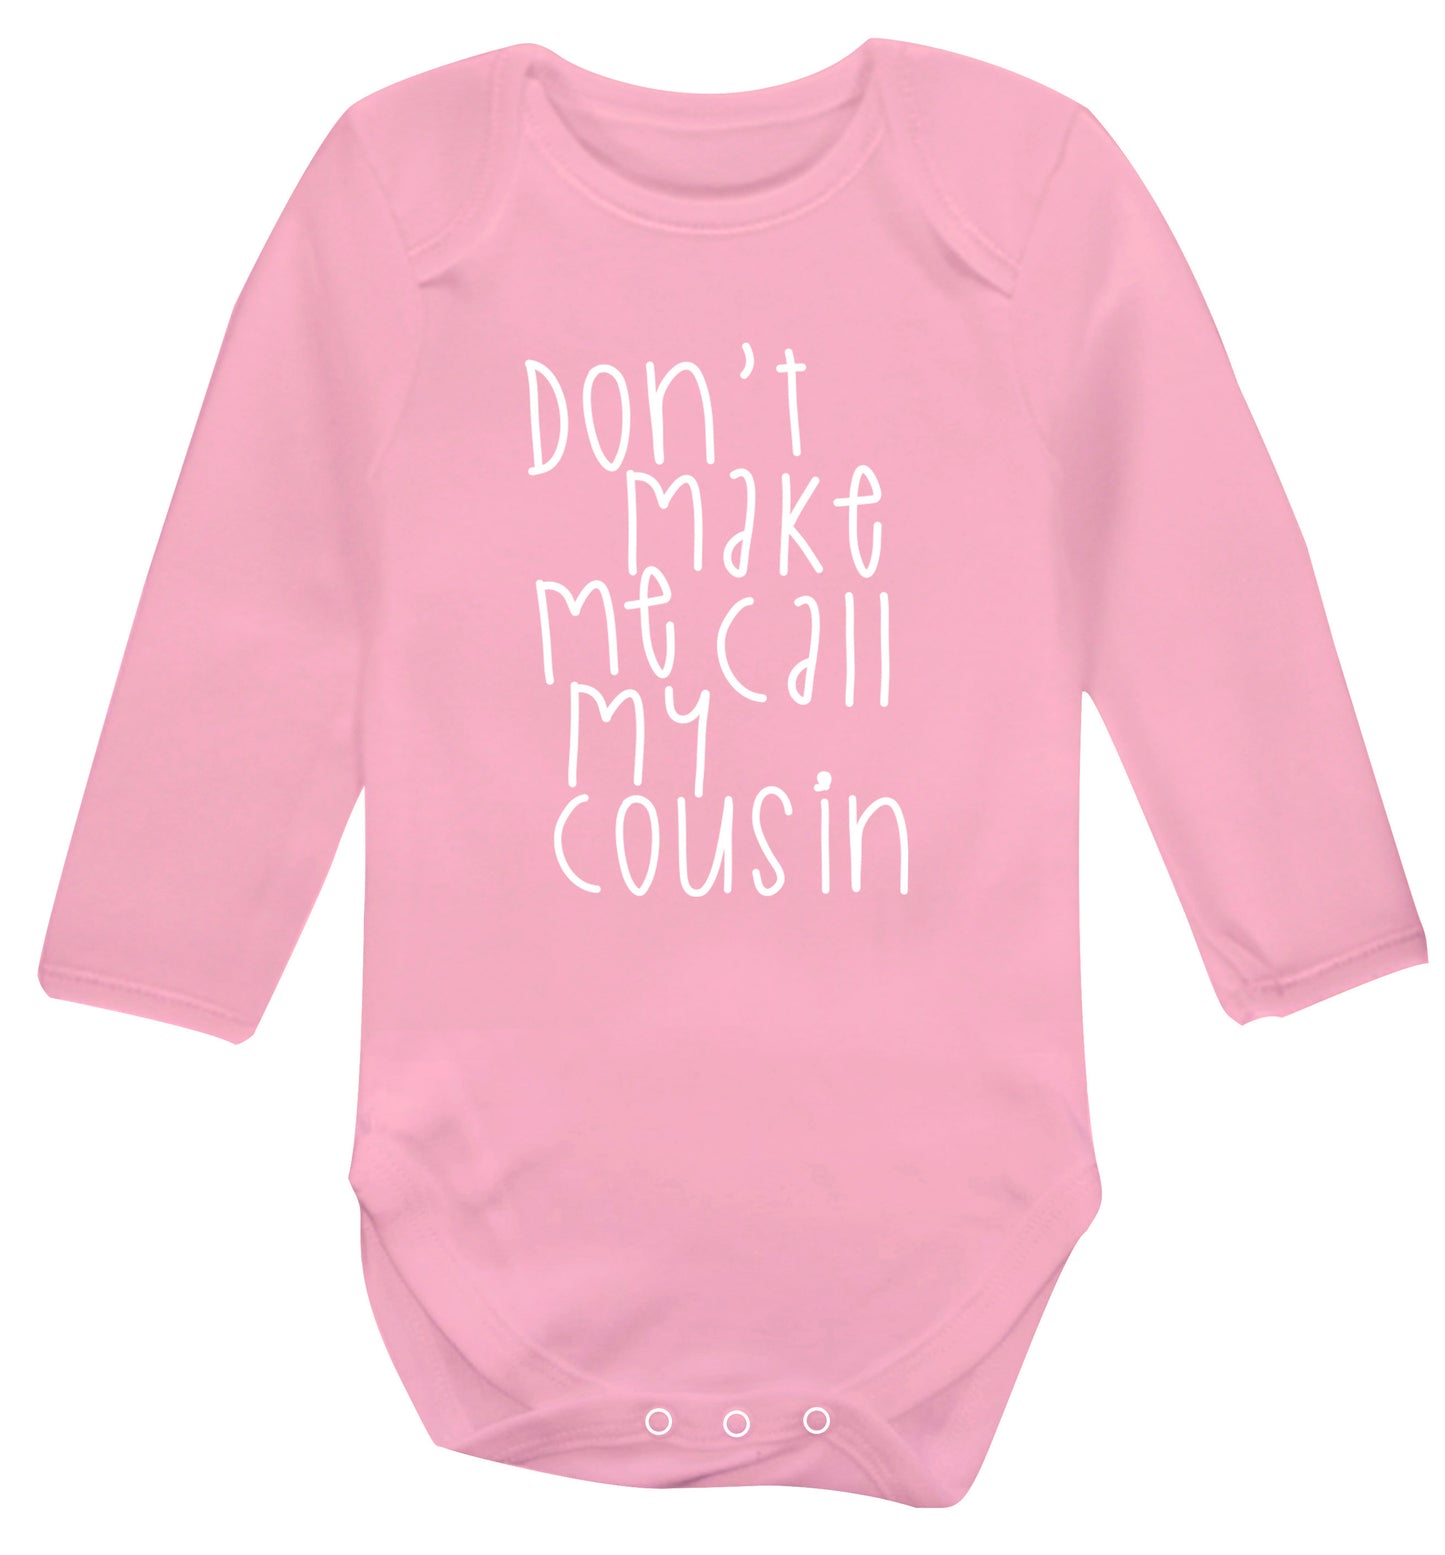 Don't make me call my cousin Baby Vest long sleeved pale pink 6-12 months